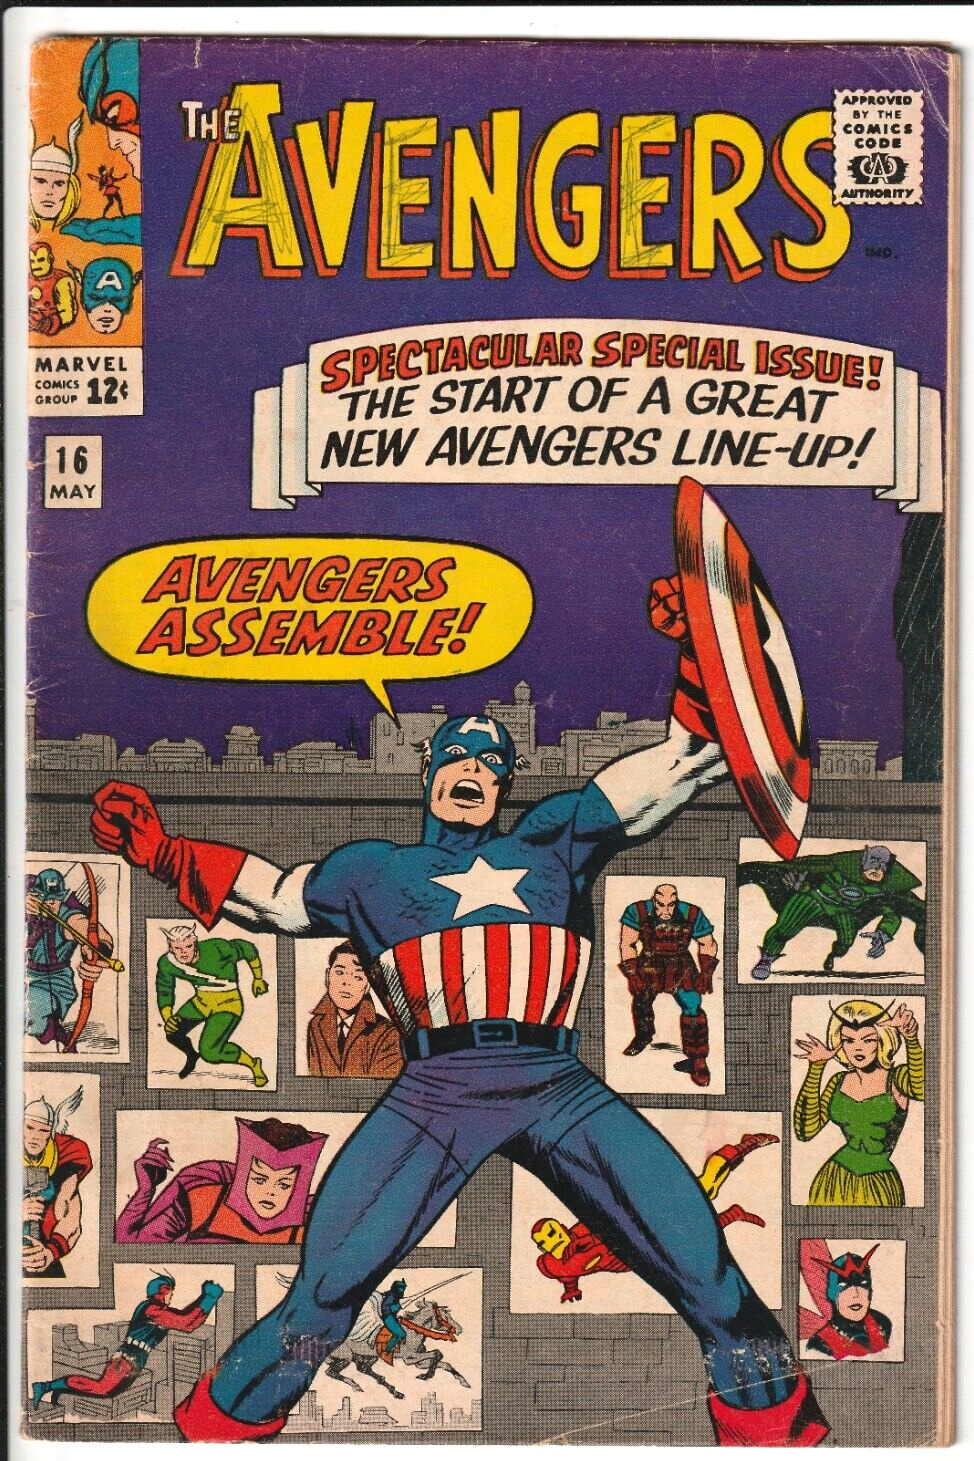 Avengers 16 1965 Marvel Comics 3.0 GD/VG KEY HAWKEYE WITCH QUICKSILVER JOIN TEAM